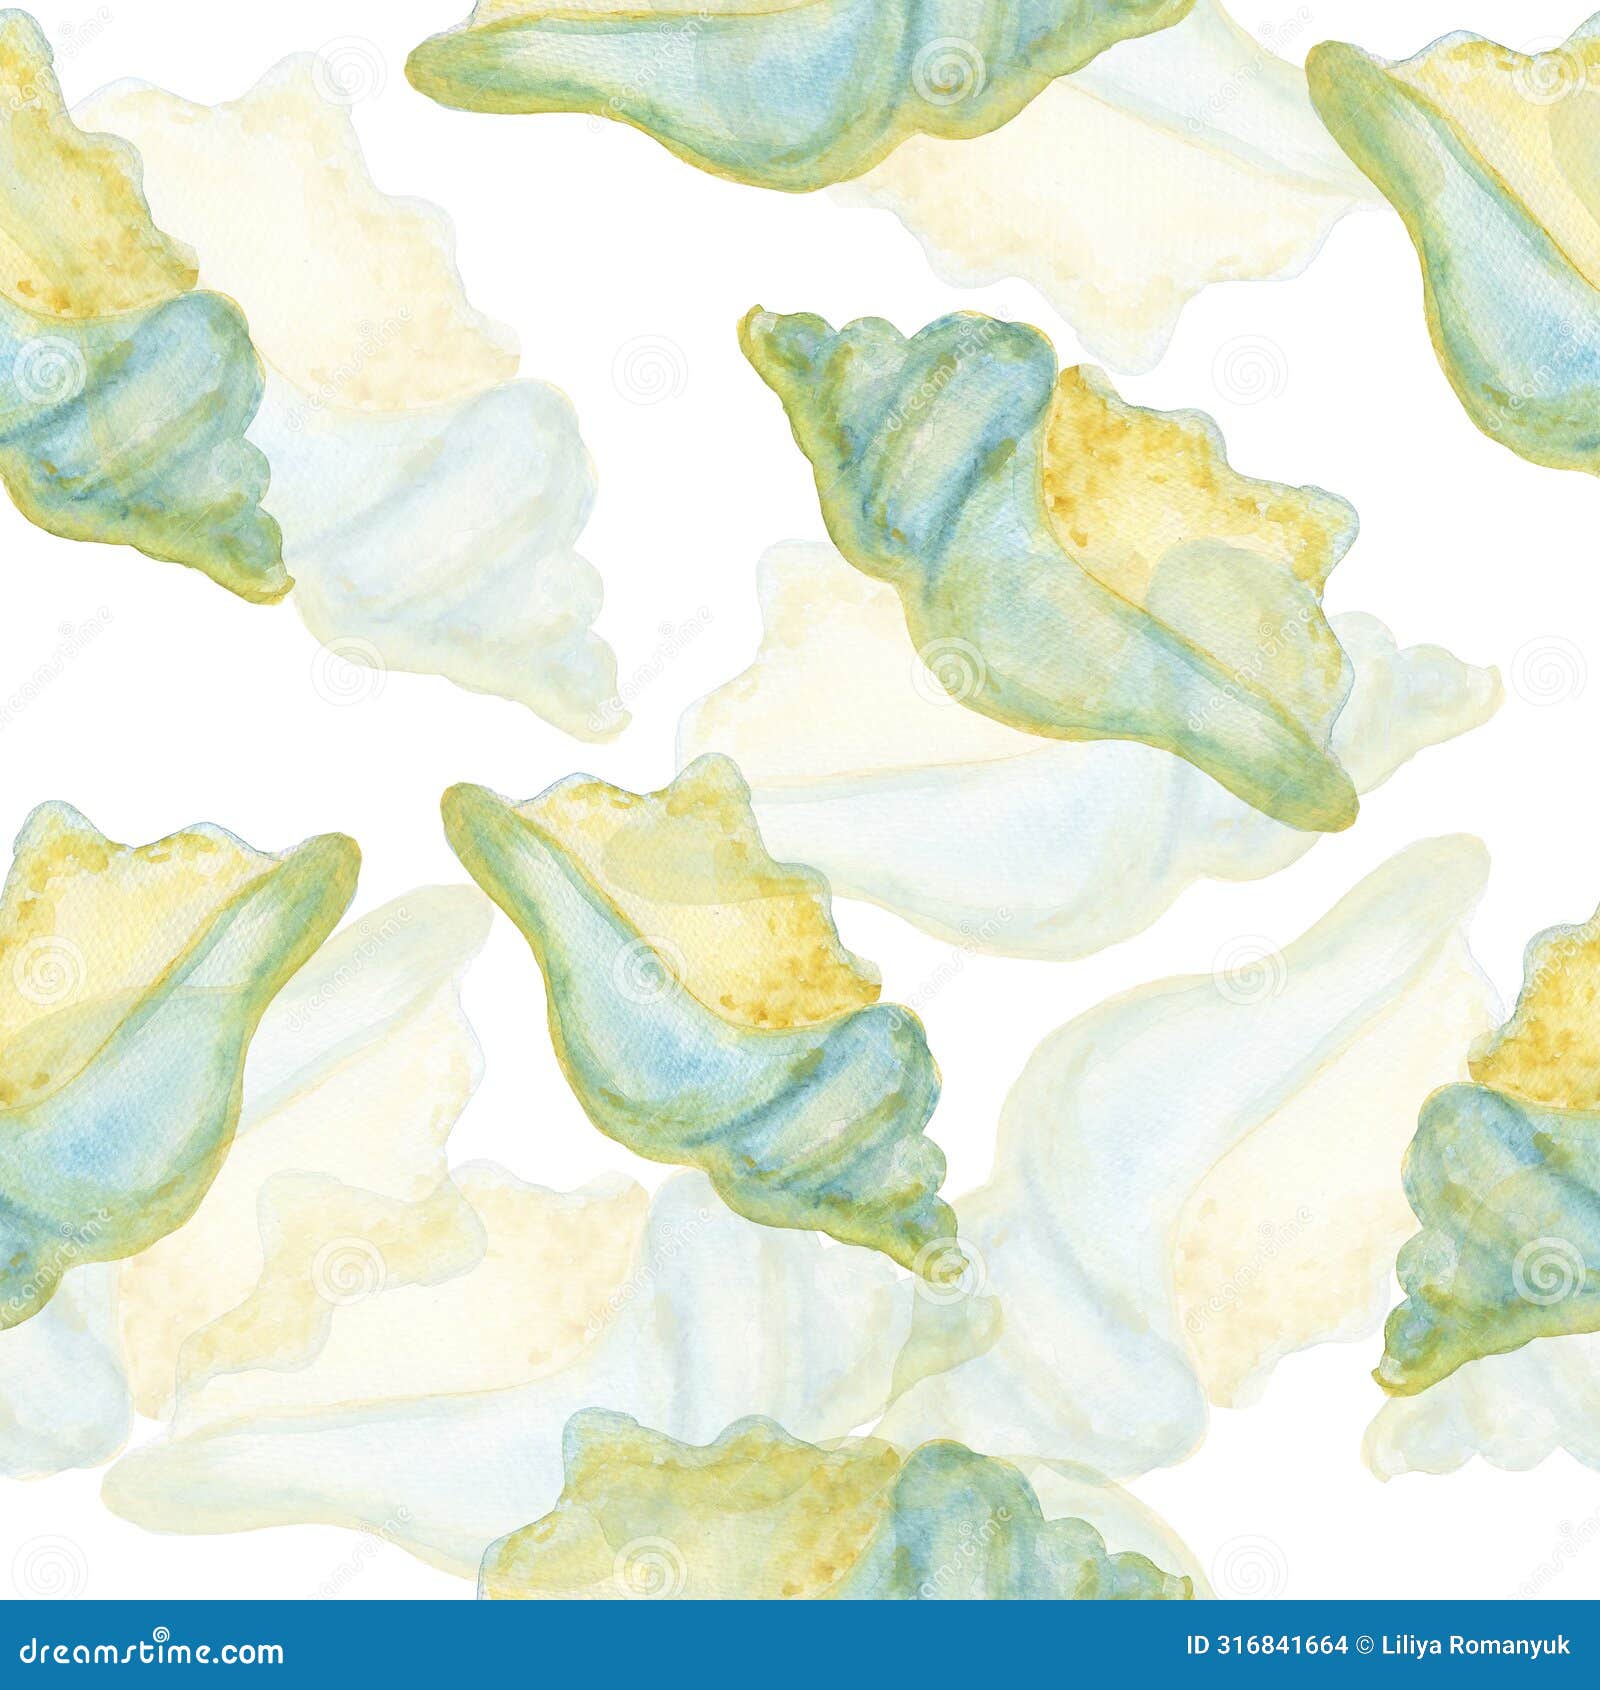 trophonopsis breviata sea ocean shell seamless pattern with translucent shell background watercolor 